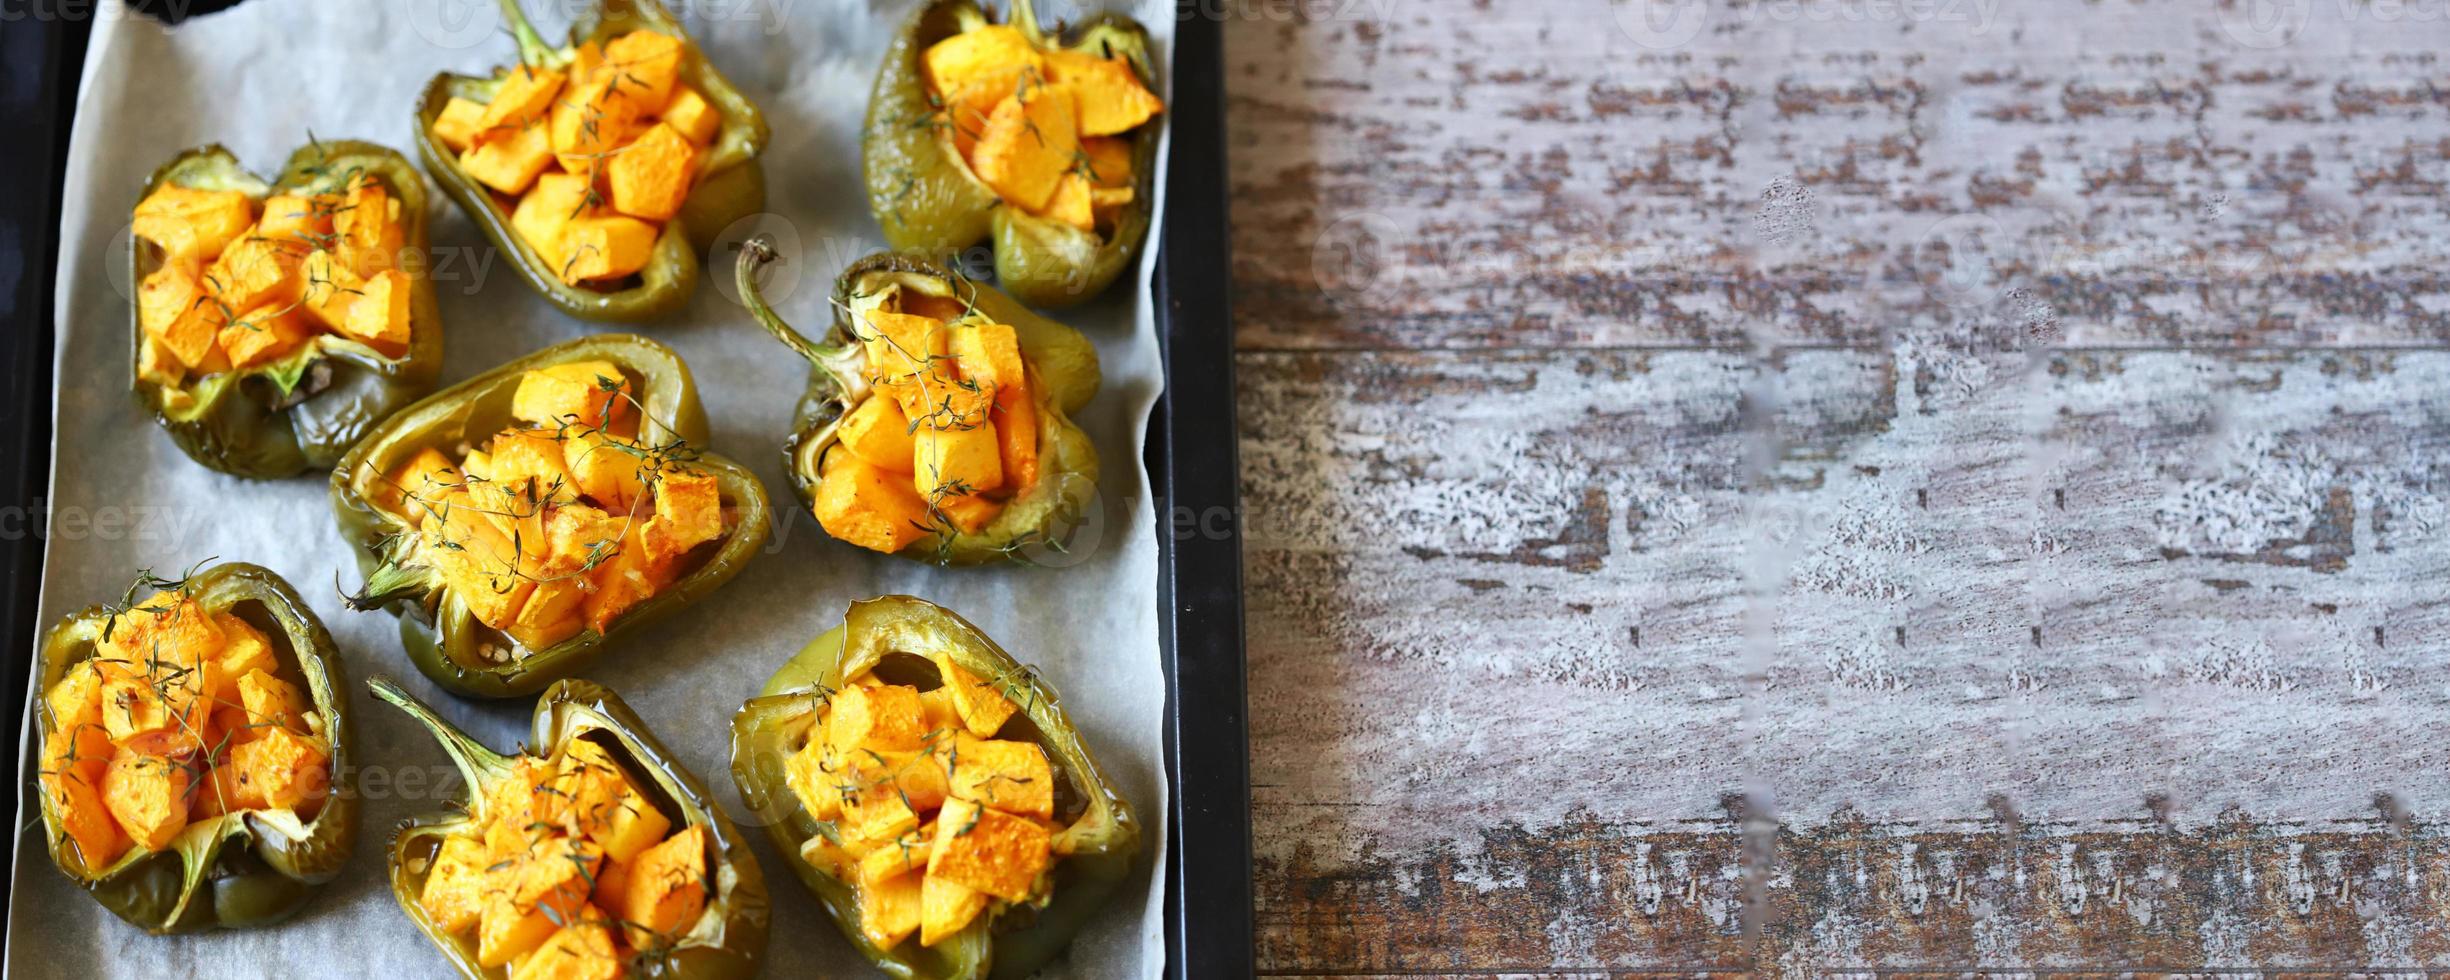 Baked peppers stuffed with pumpkin photo